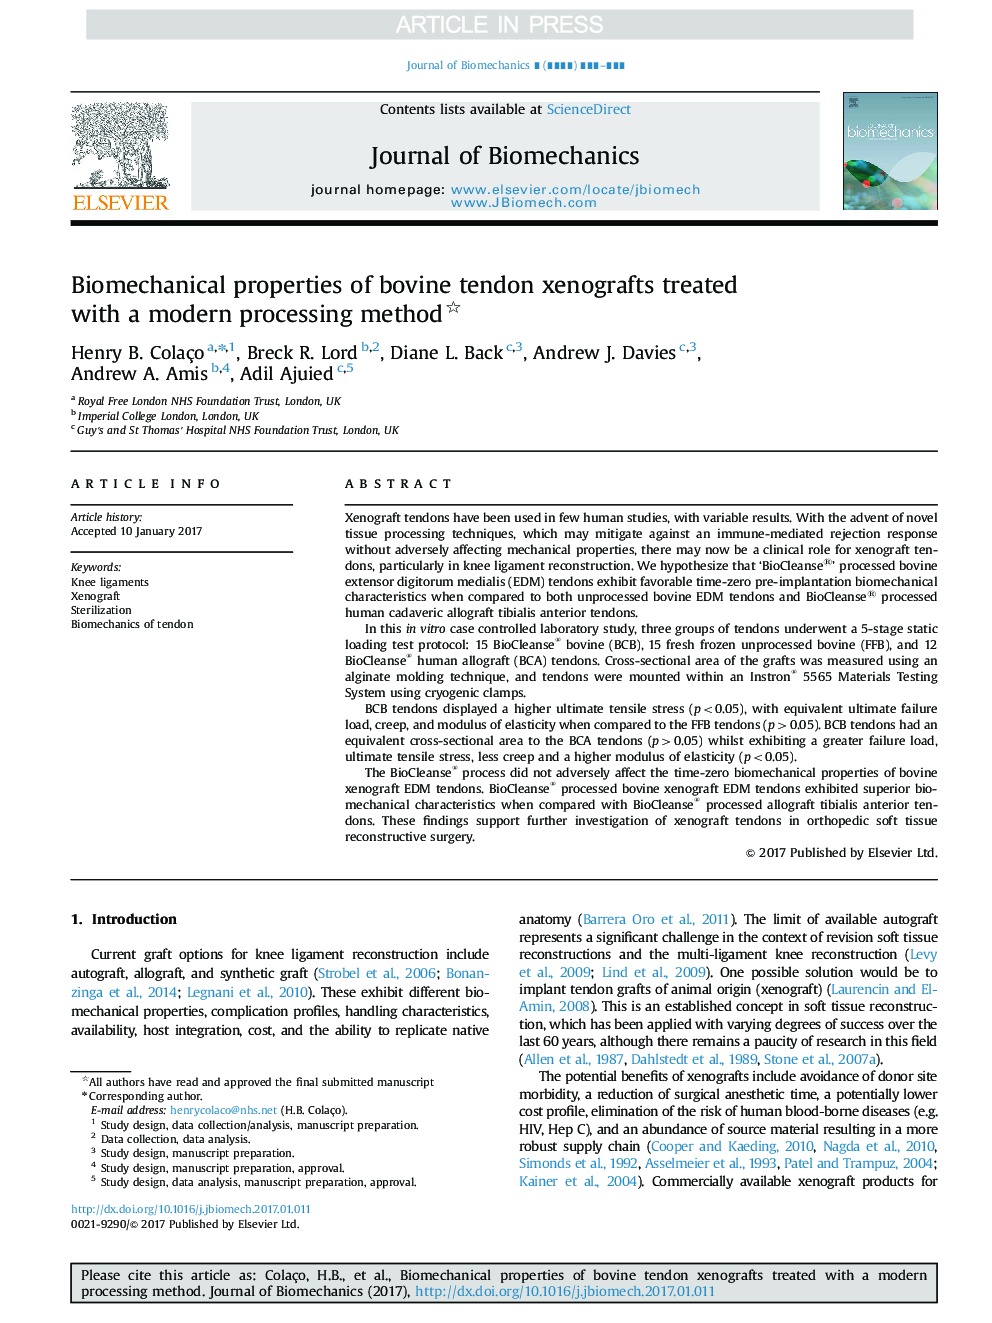 Biomechanical properties of bovine tendon xenografts treated with a modern processing method